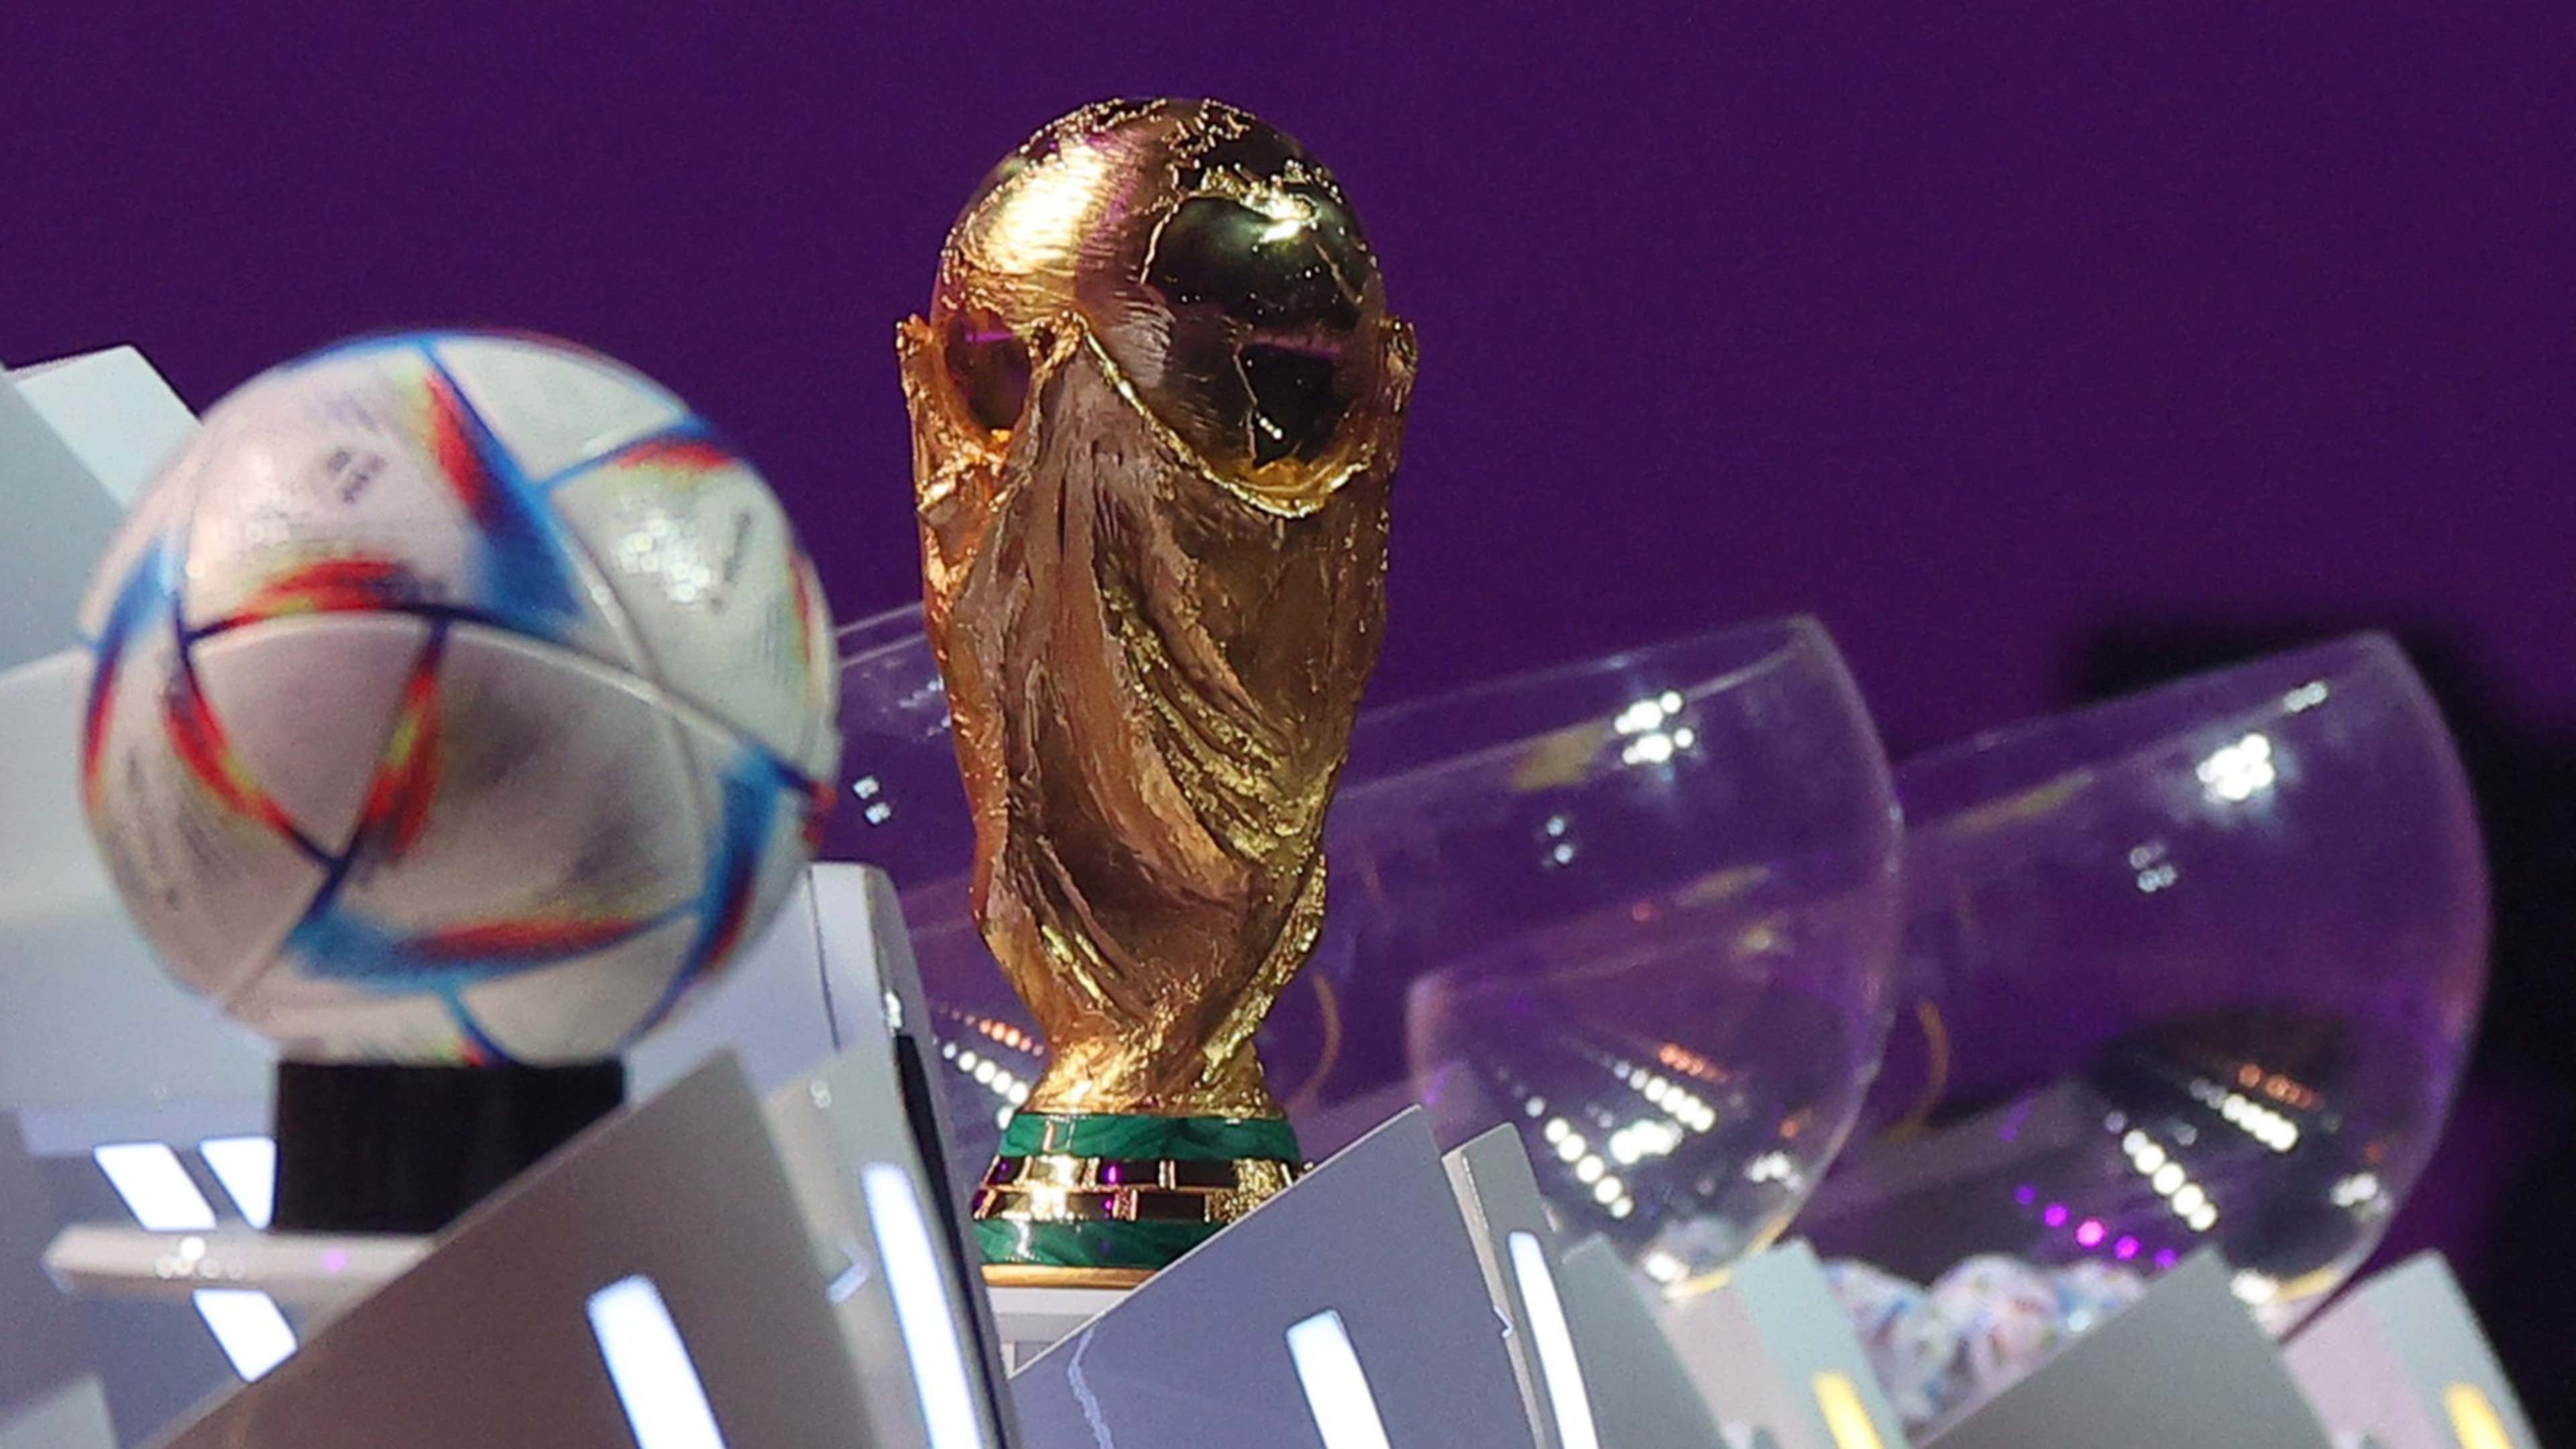 World Cup 2022 final tickets: Prices & where to buy